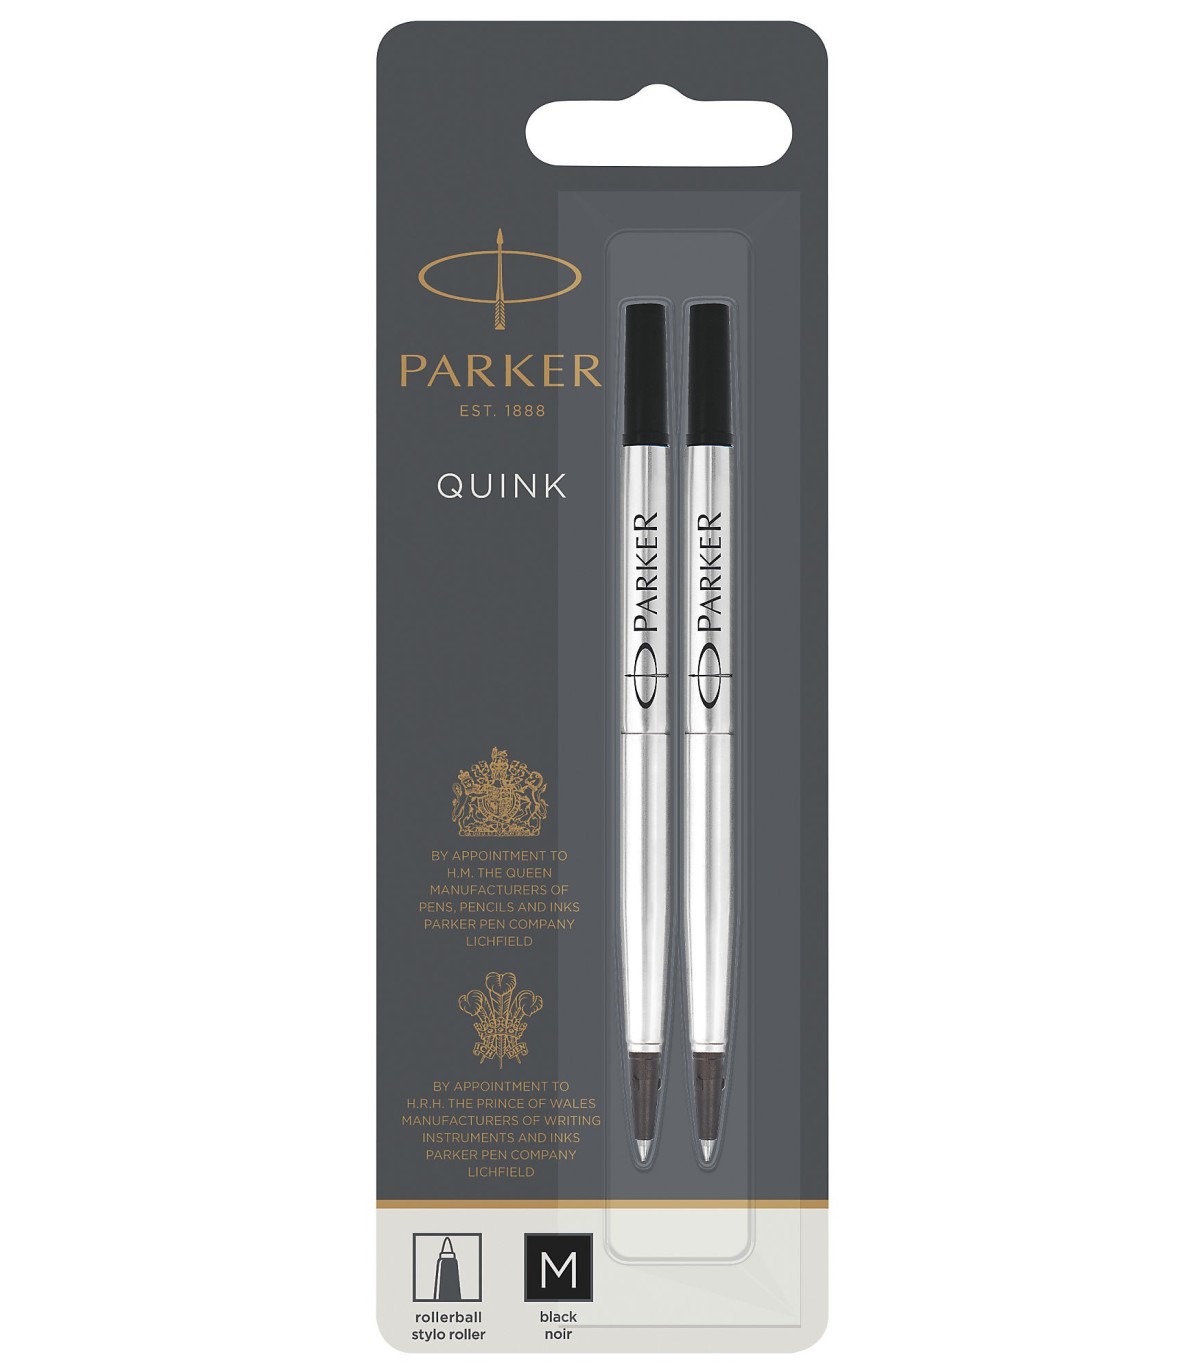 PARKER recharge Stylo Roller, pointe moyenne, noire, blister X 2